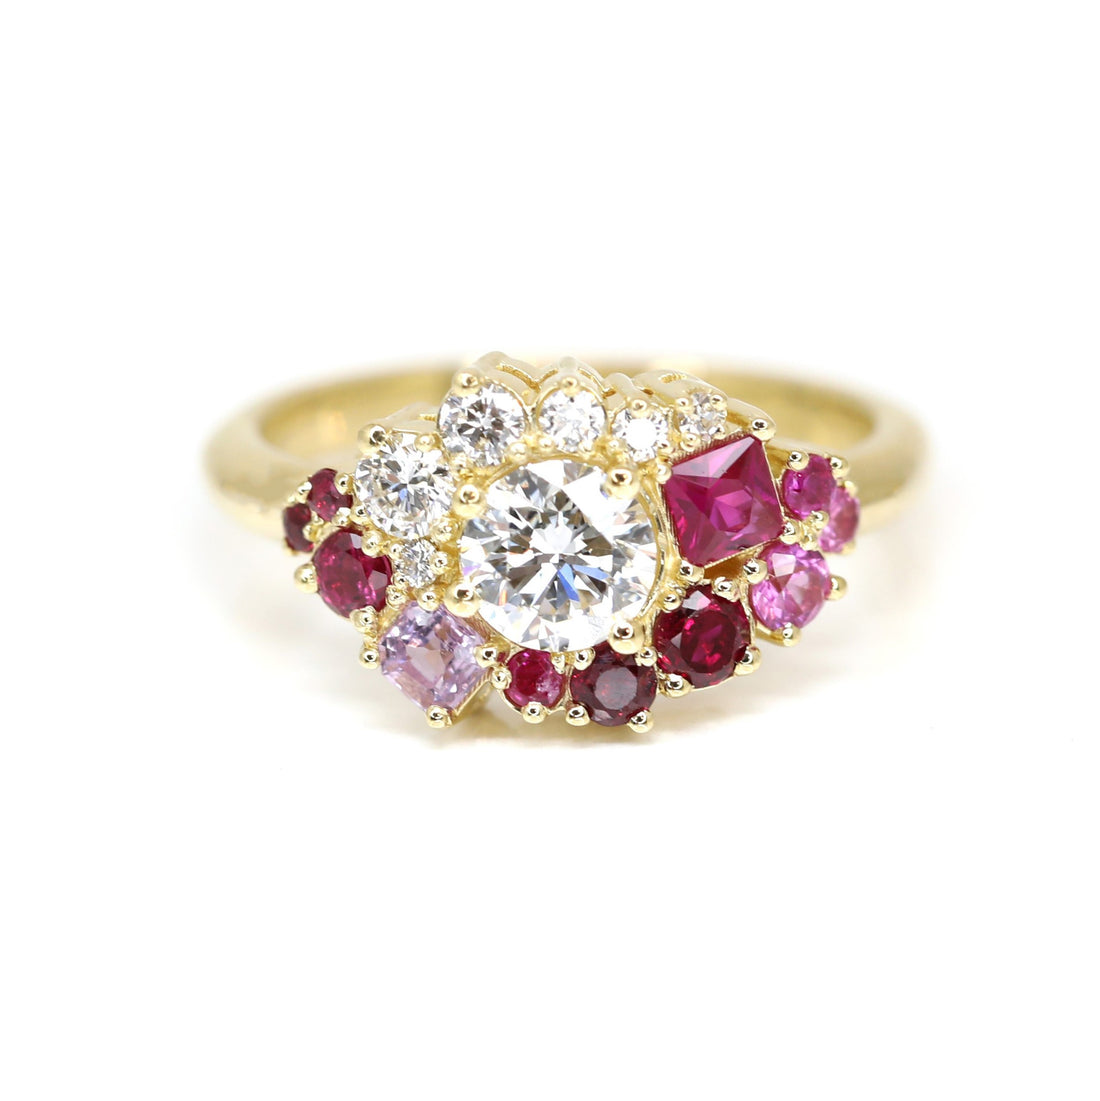 lab grown diamond and ruby custom made yellow gold engagement ring in montreal by bena jewelry designer on a white background